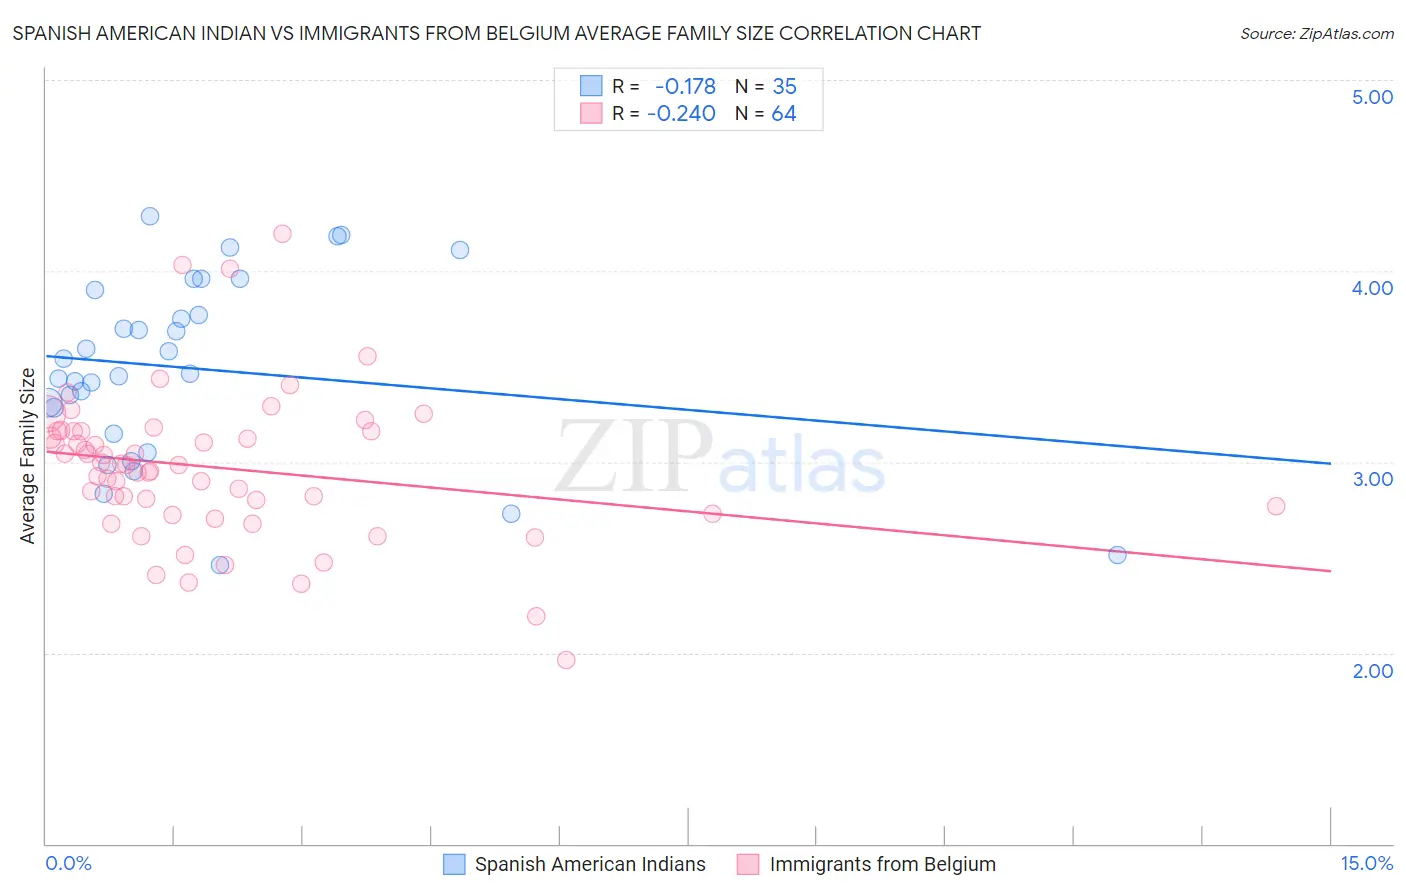 Spanish American Indian vs Immigrants from Belgium Average Family Size